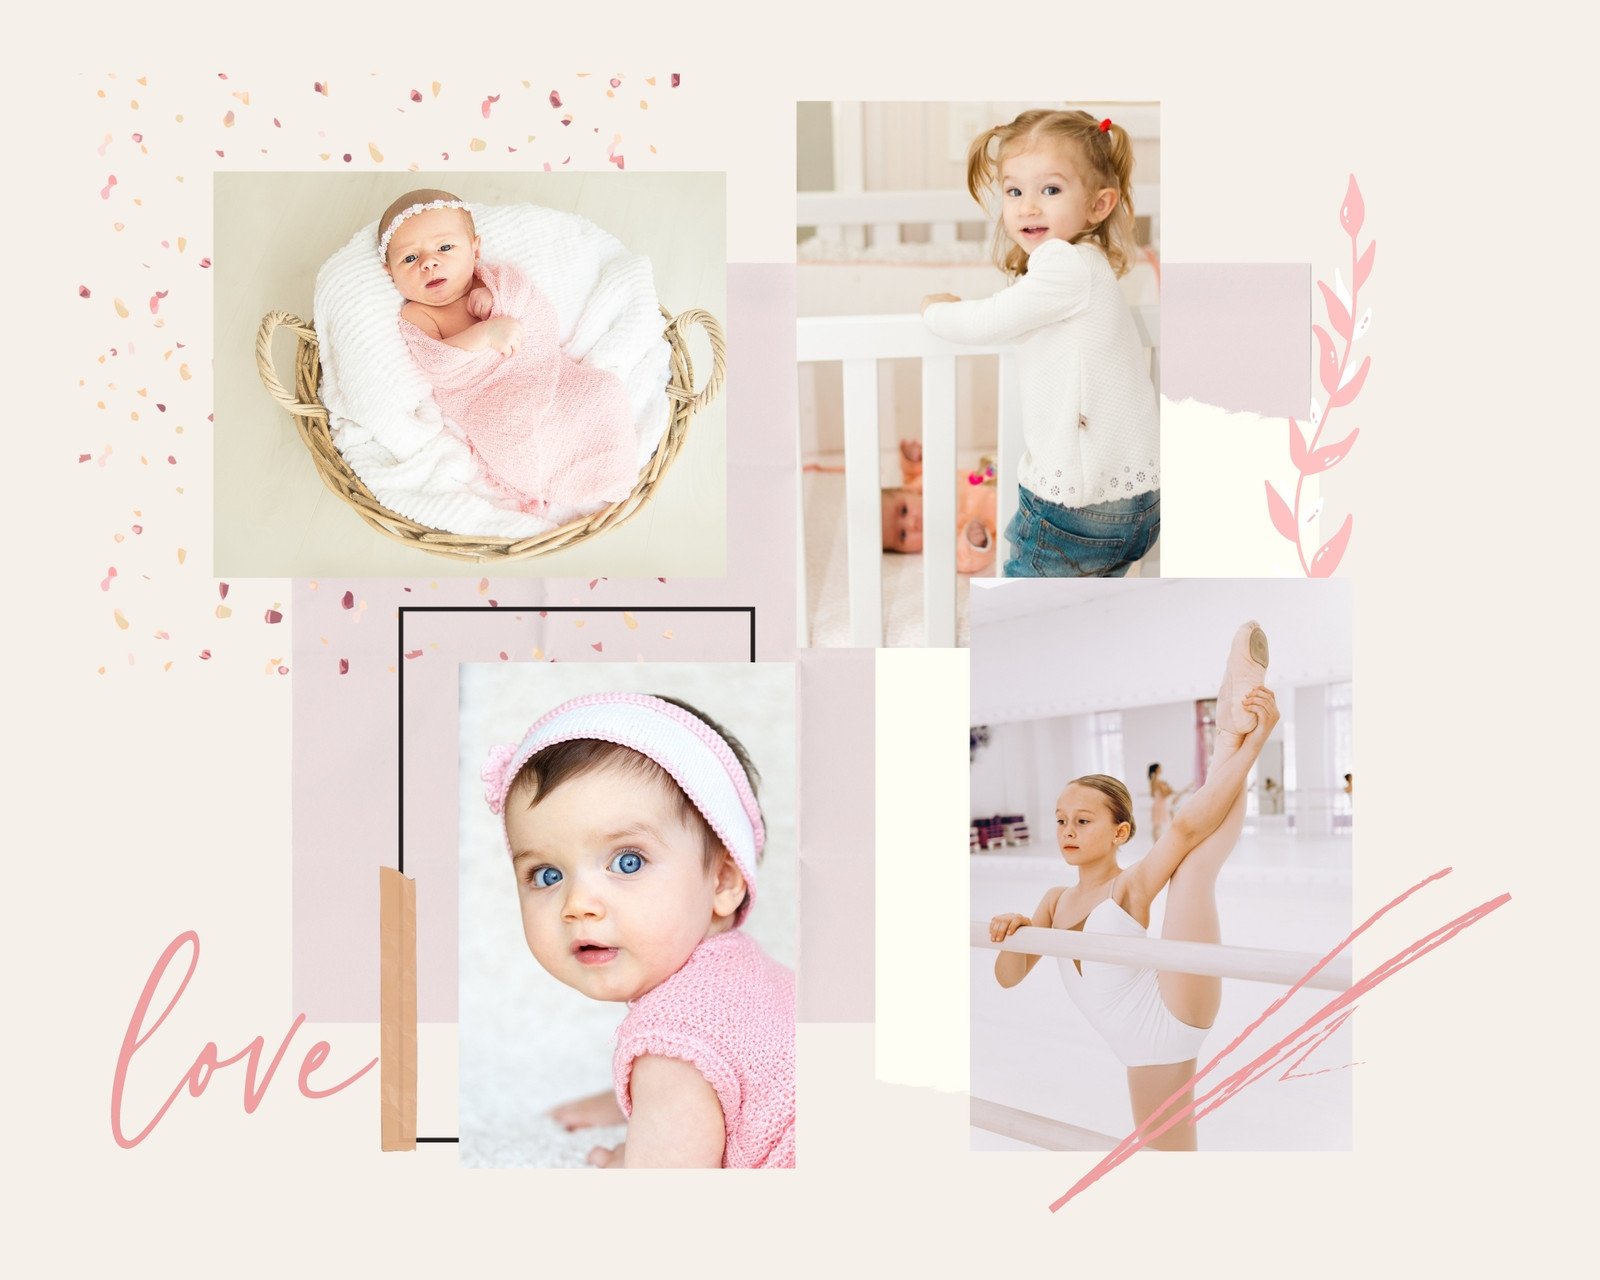 A Cute Baby Girl Background, Cute, Girl, Baby Background Image And  Wallpaper for Free Download